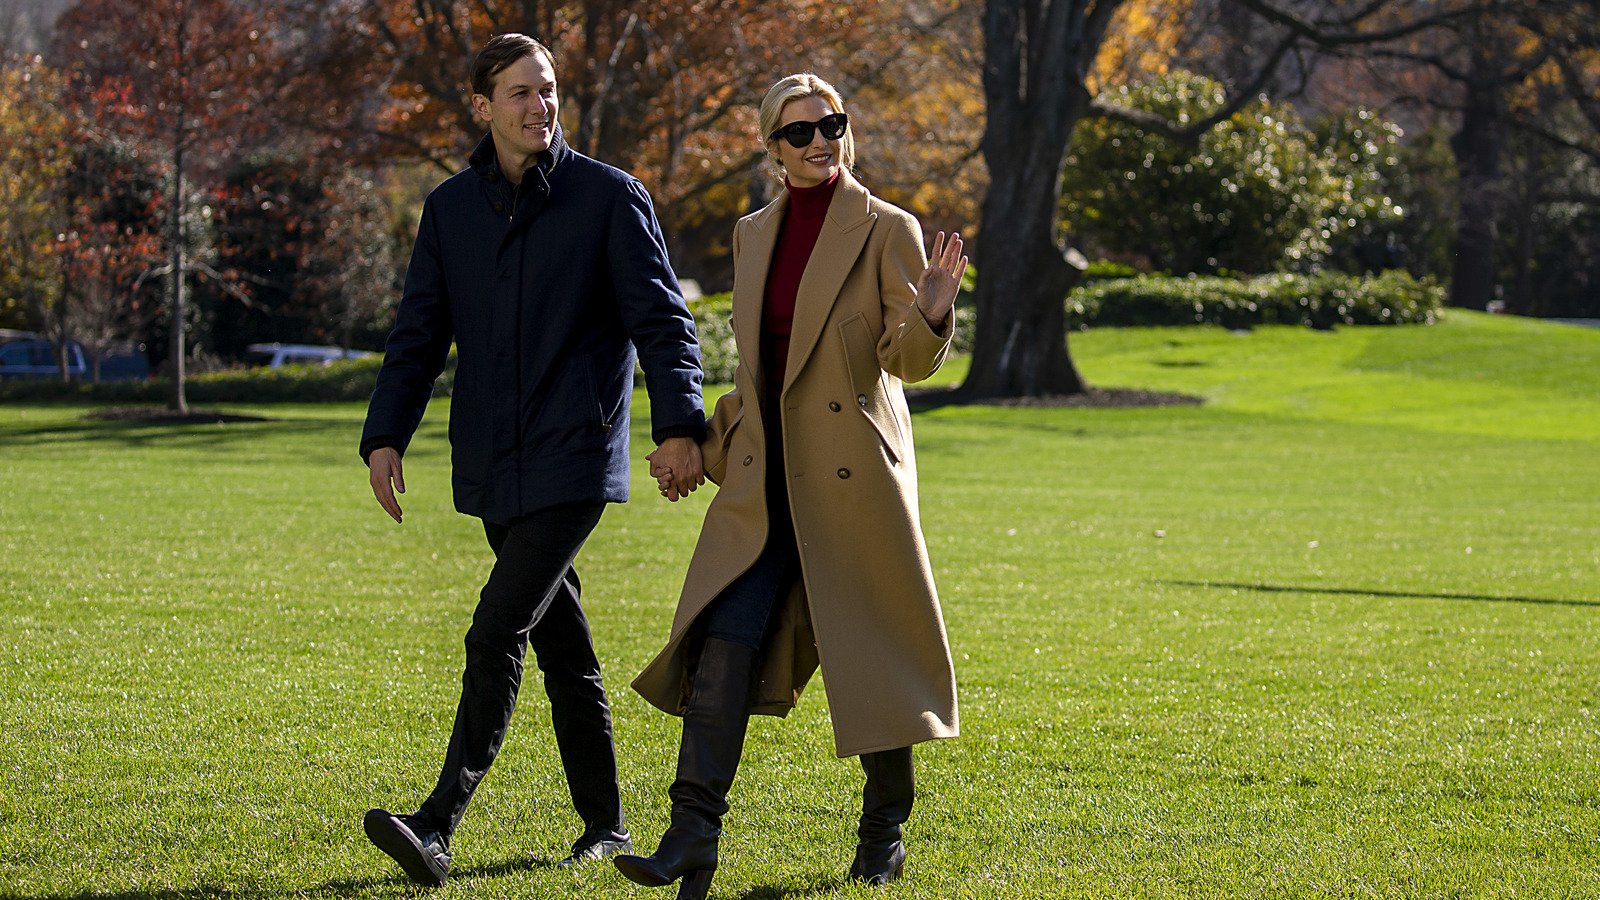 Why Ivanka And Jared's New Neighbors May Give Them The Cold Shoulder